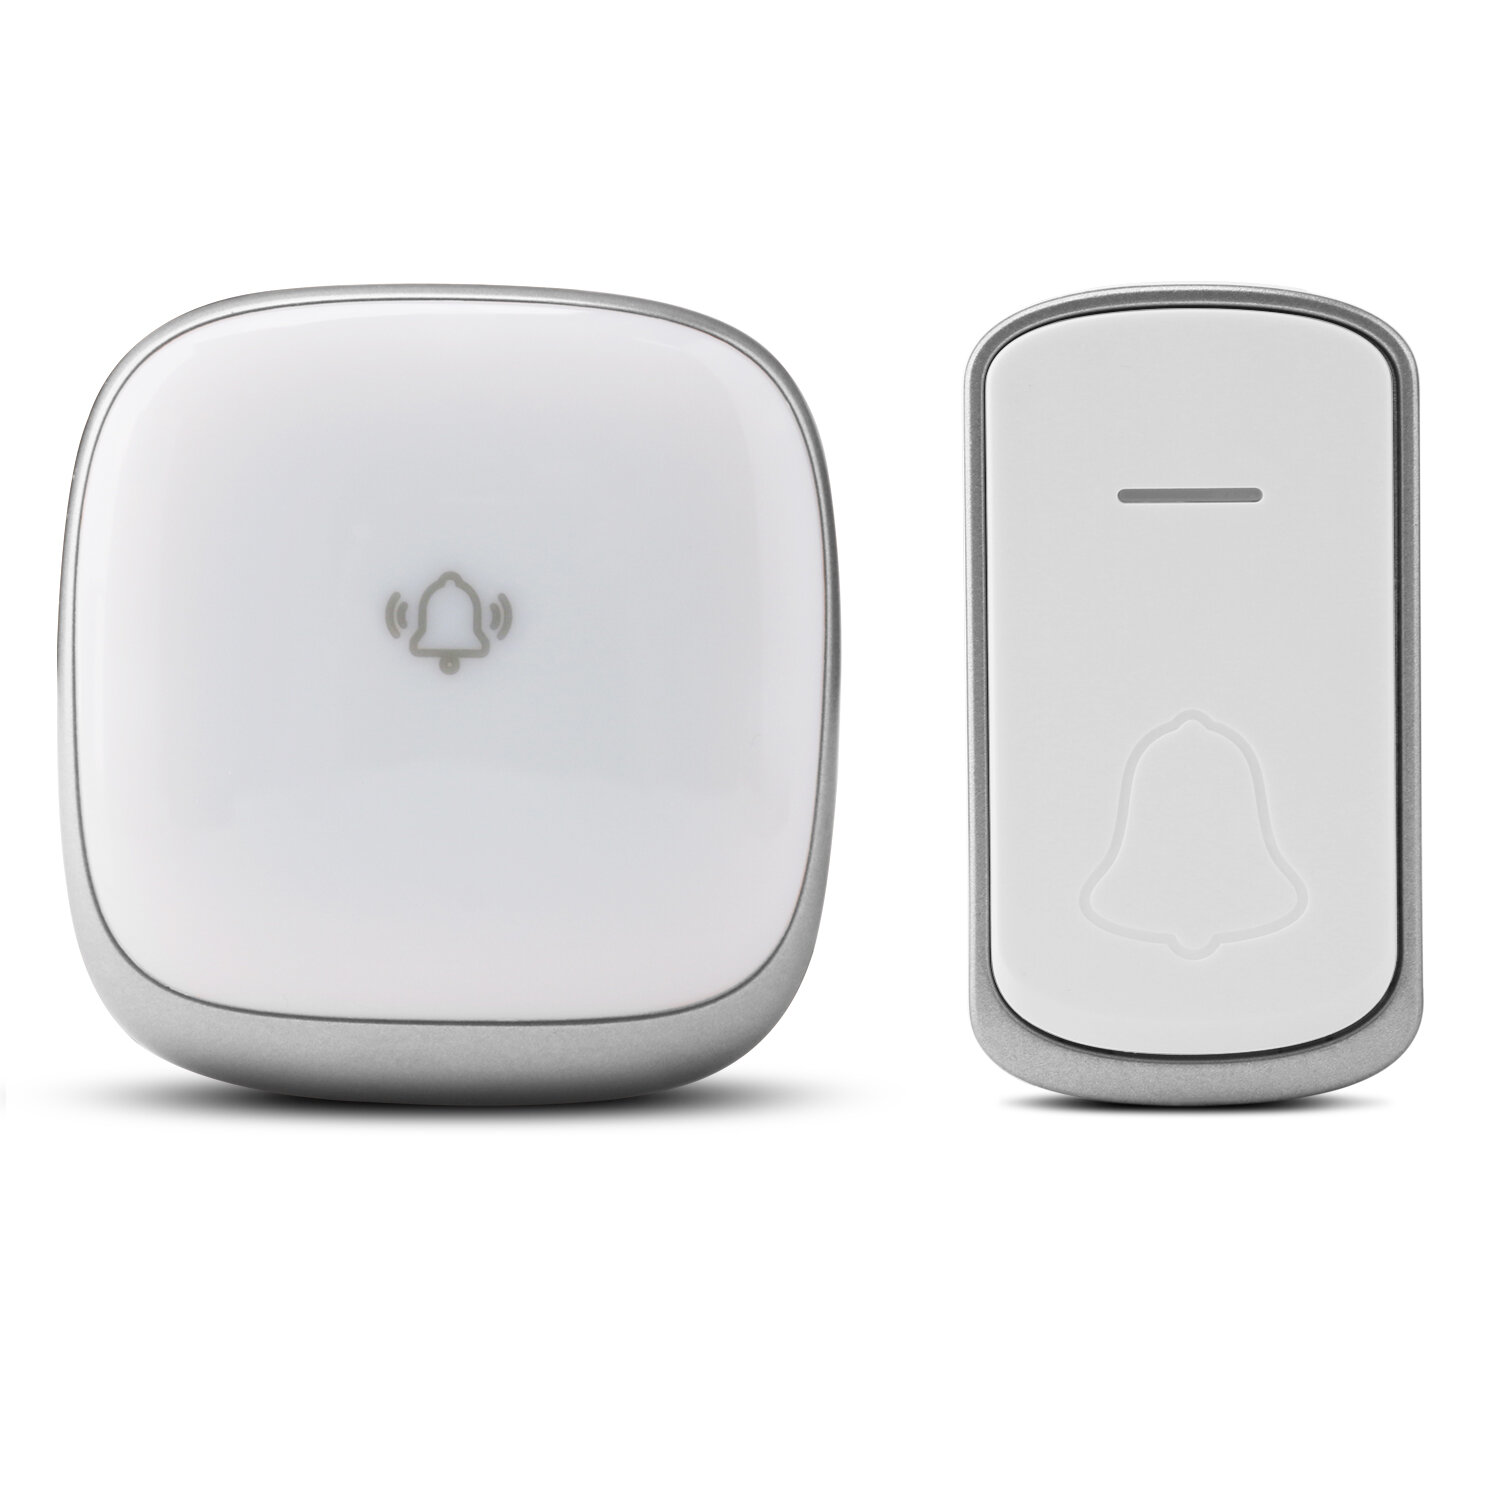 Battery-operated Wireless Doorbell Button Door Chime with 36 Melodies Songs 